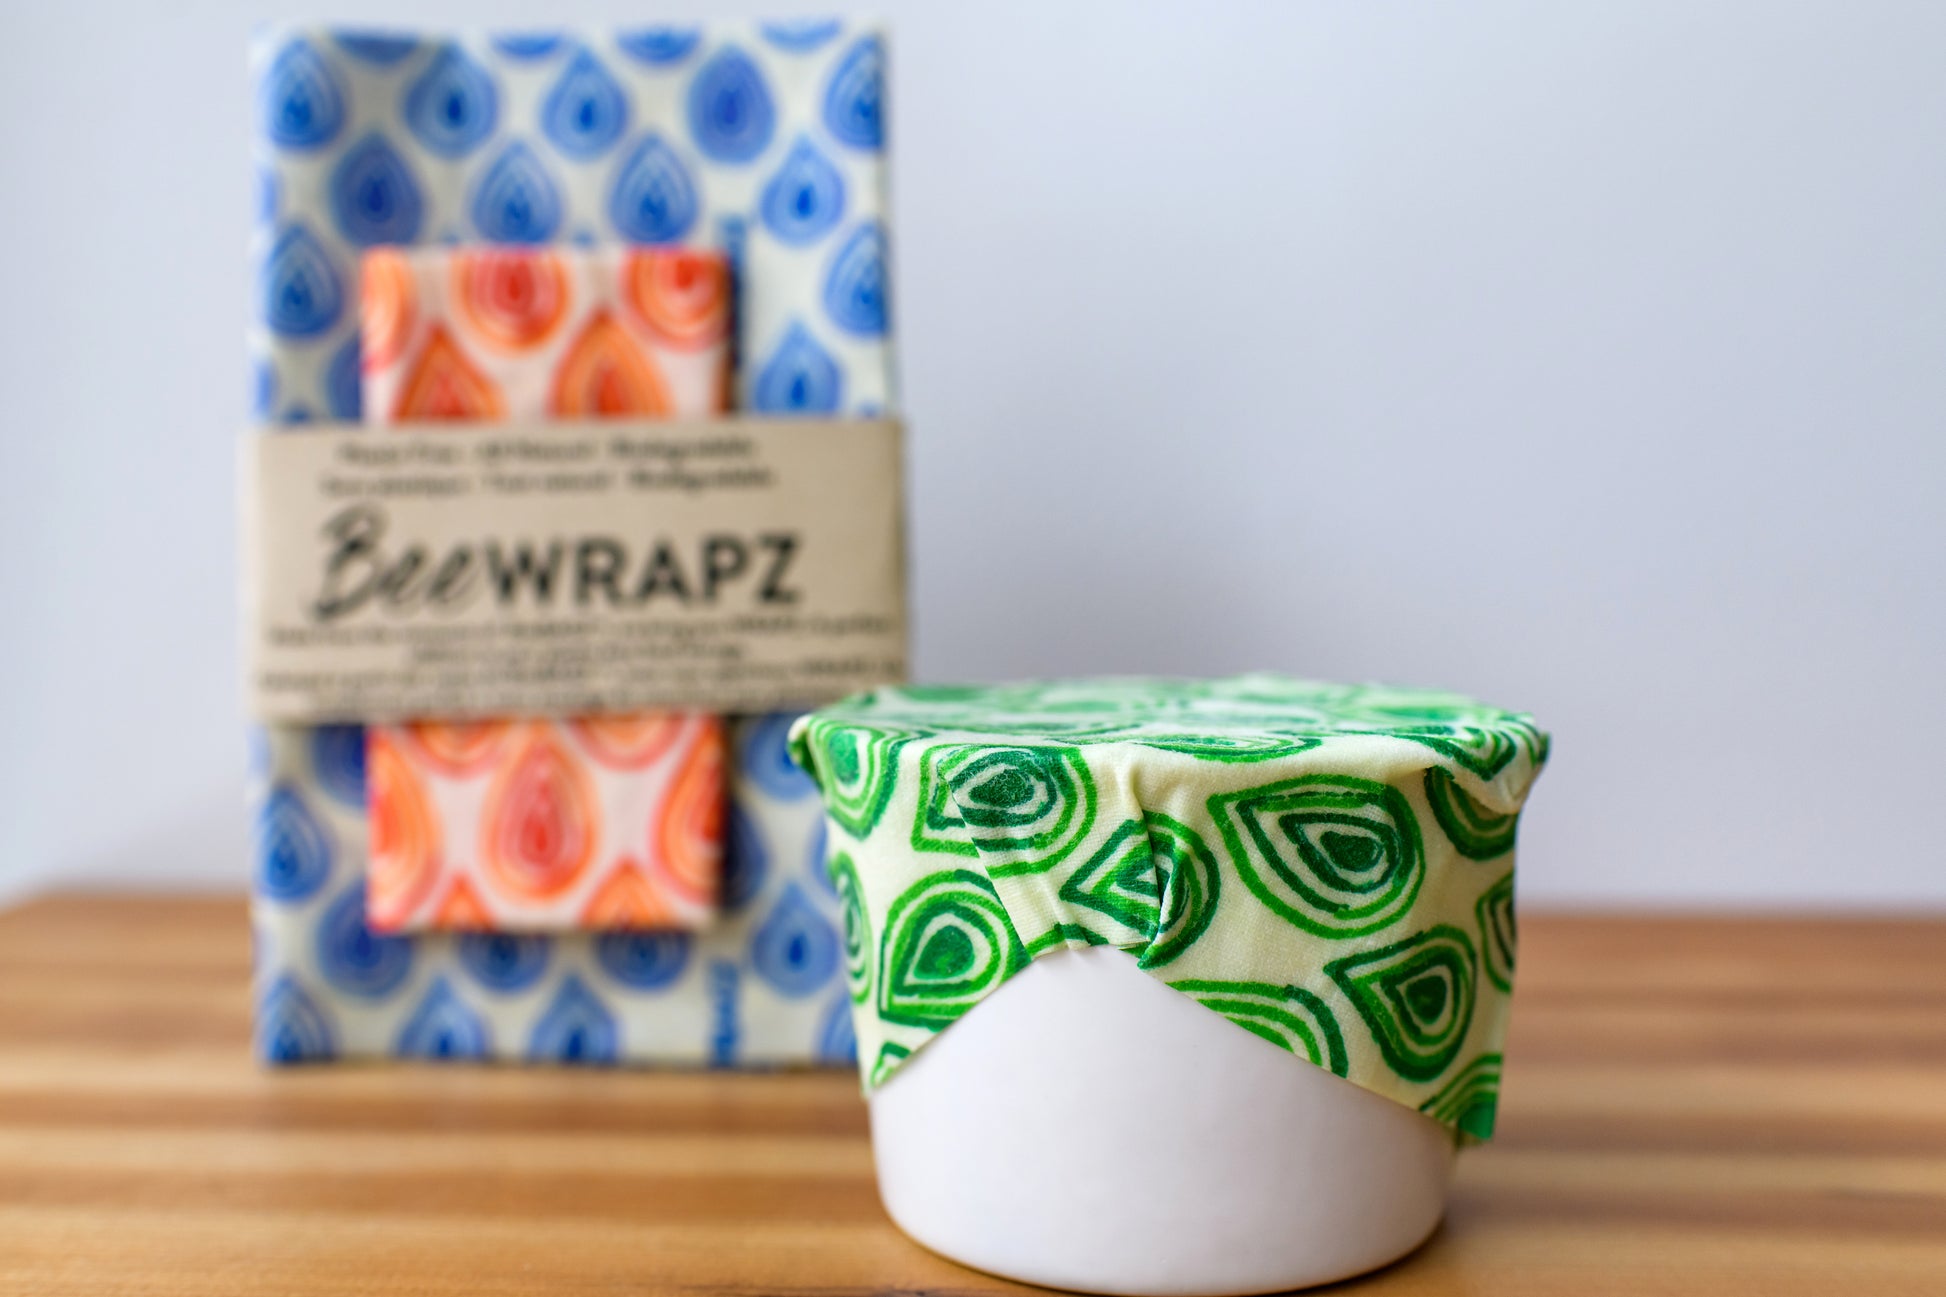 Beeswax wrap that solves your food storage needs.  BeeWRAPZ™ are reusable food wraps that tightly cover the tops of cans, bowls, glasses or wrap your cut fruits and veggies keeping them fresher, longer. Another great addition to your plastic free food storage lineup. 